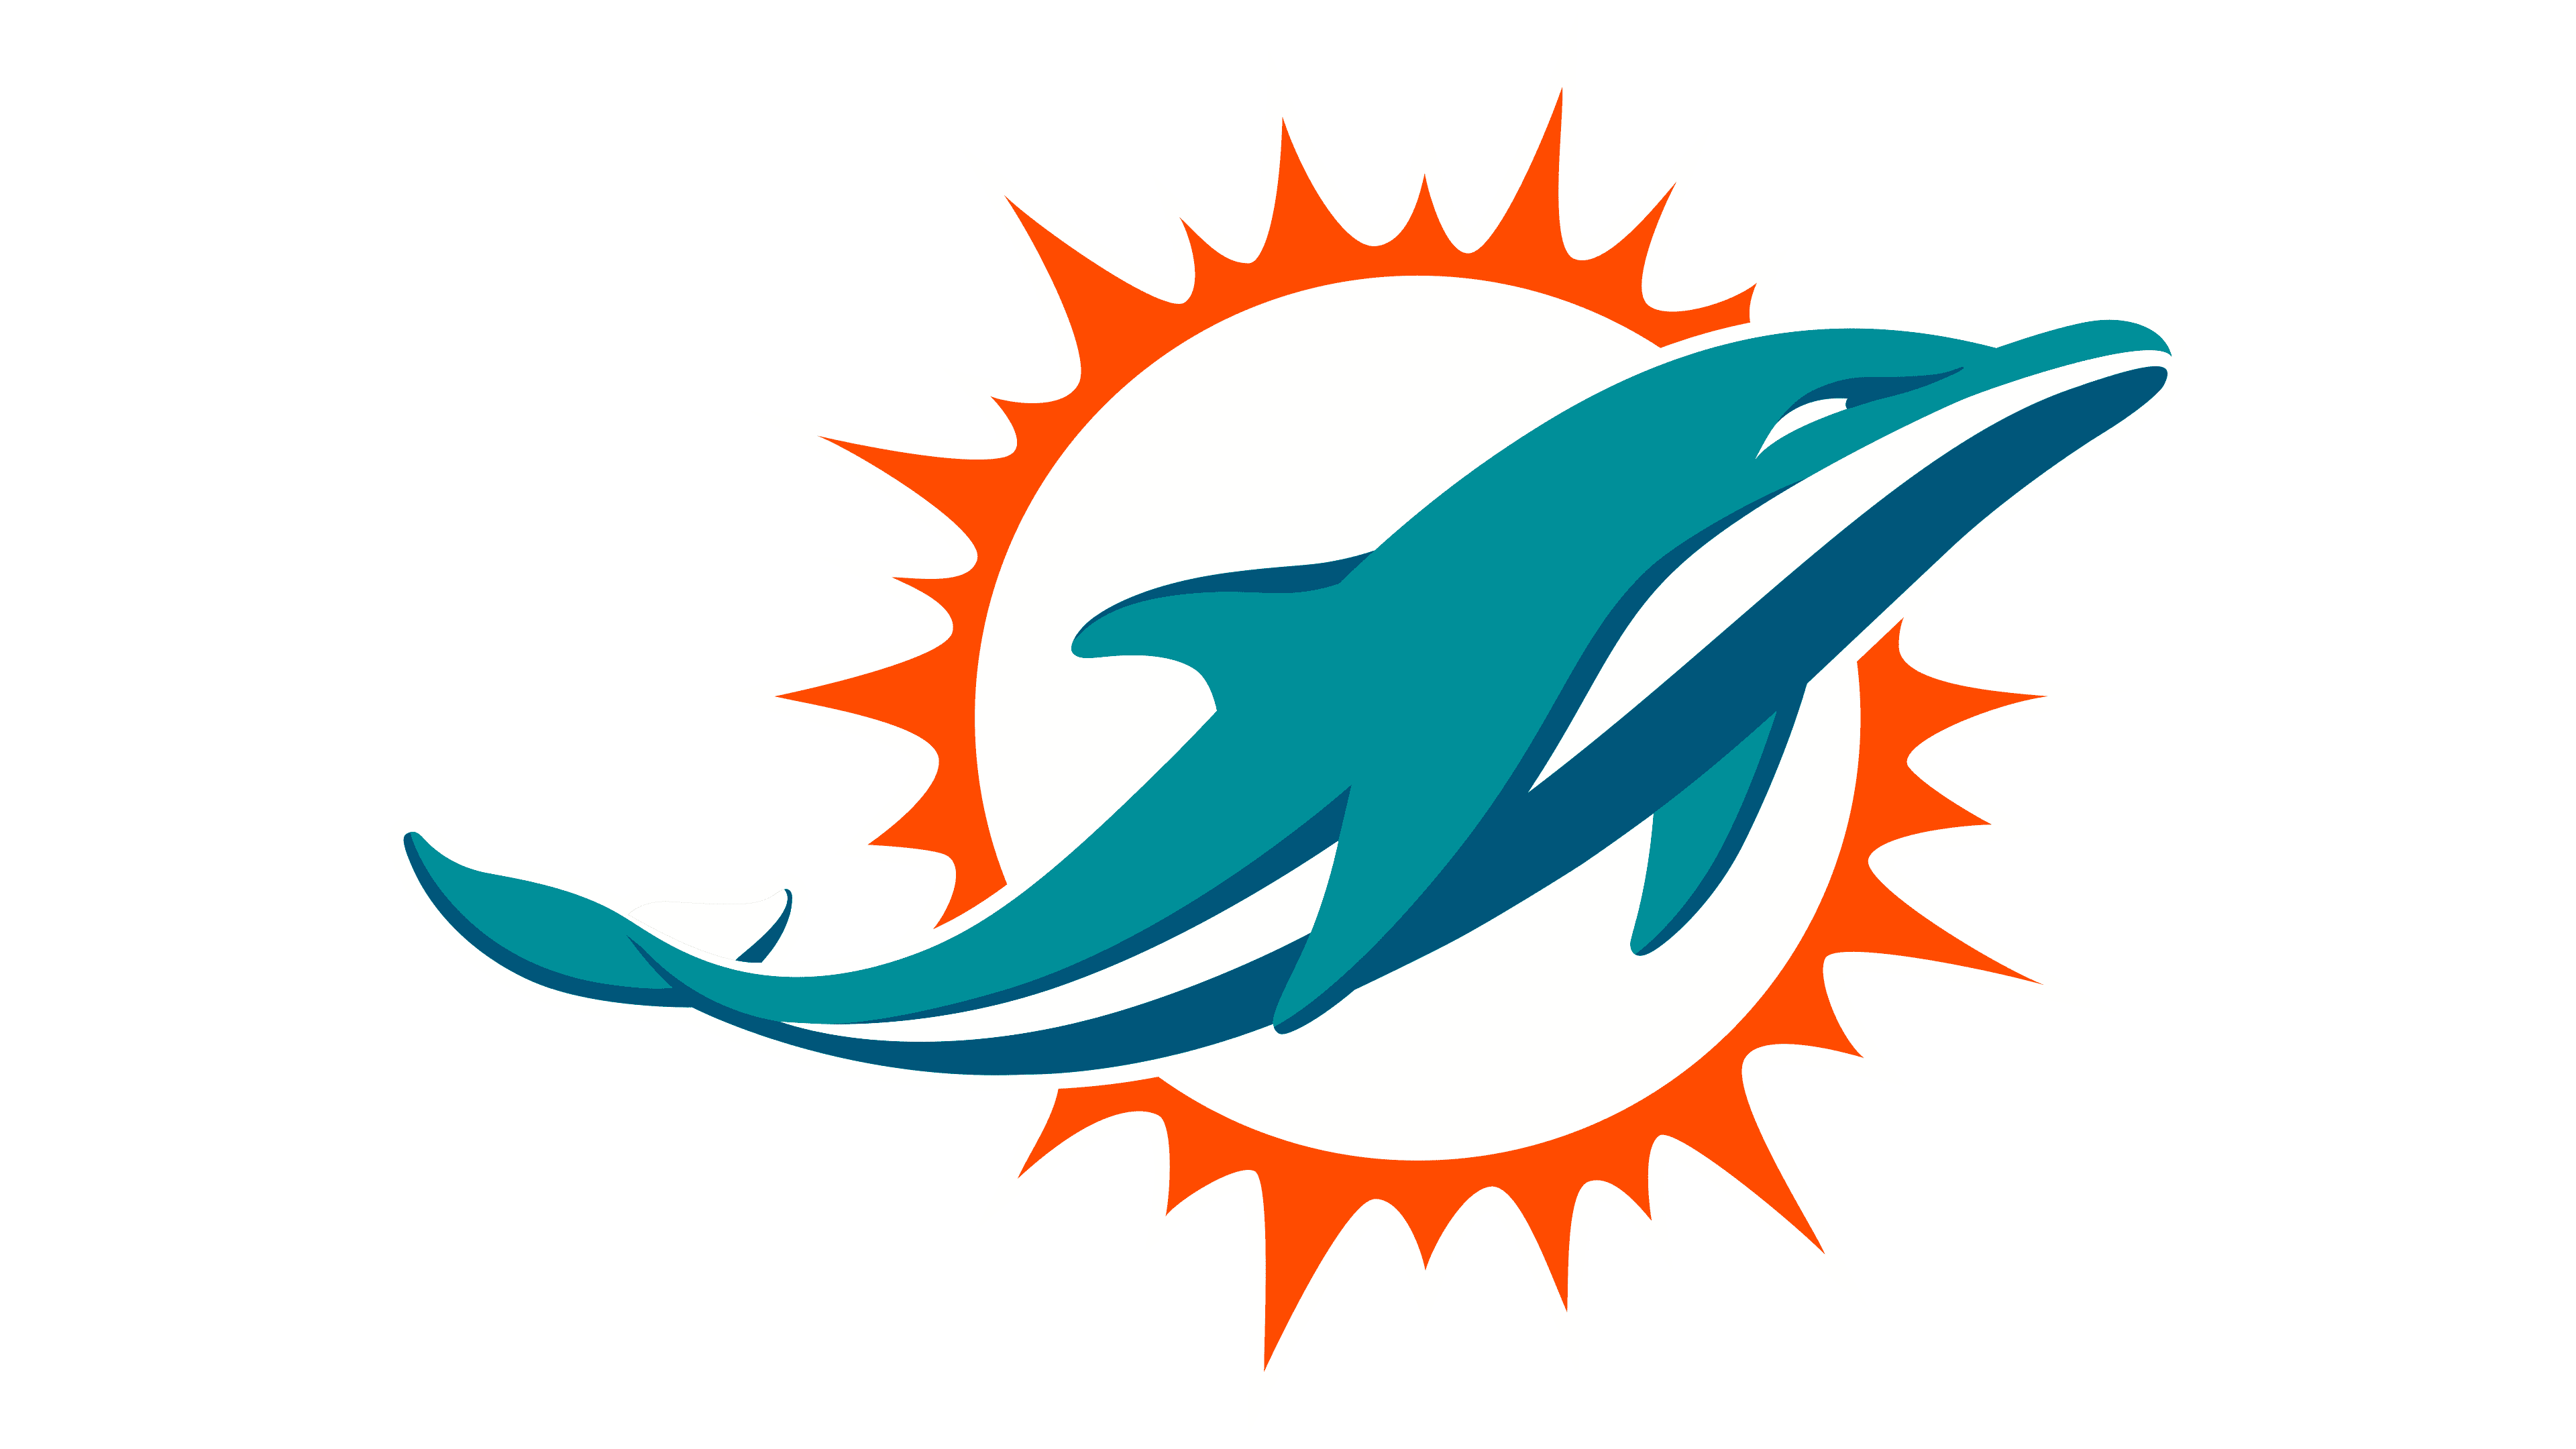 How has the Miami Dolphins team logo changed?